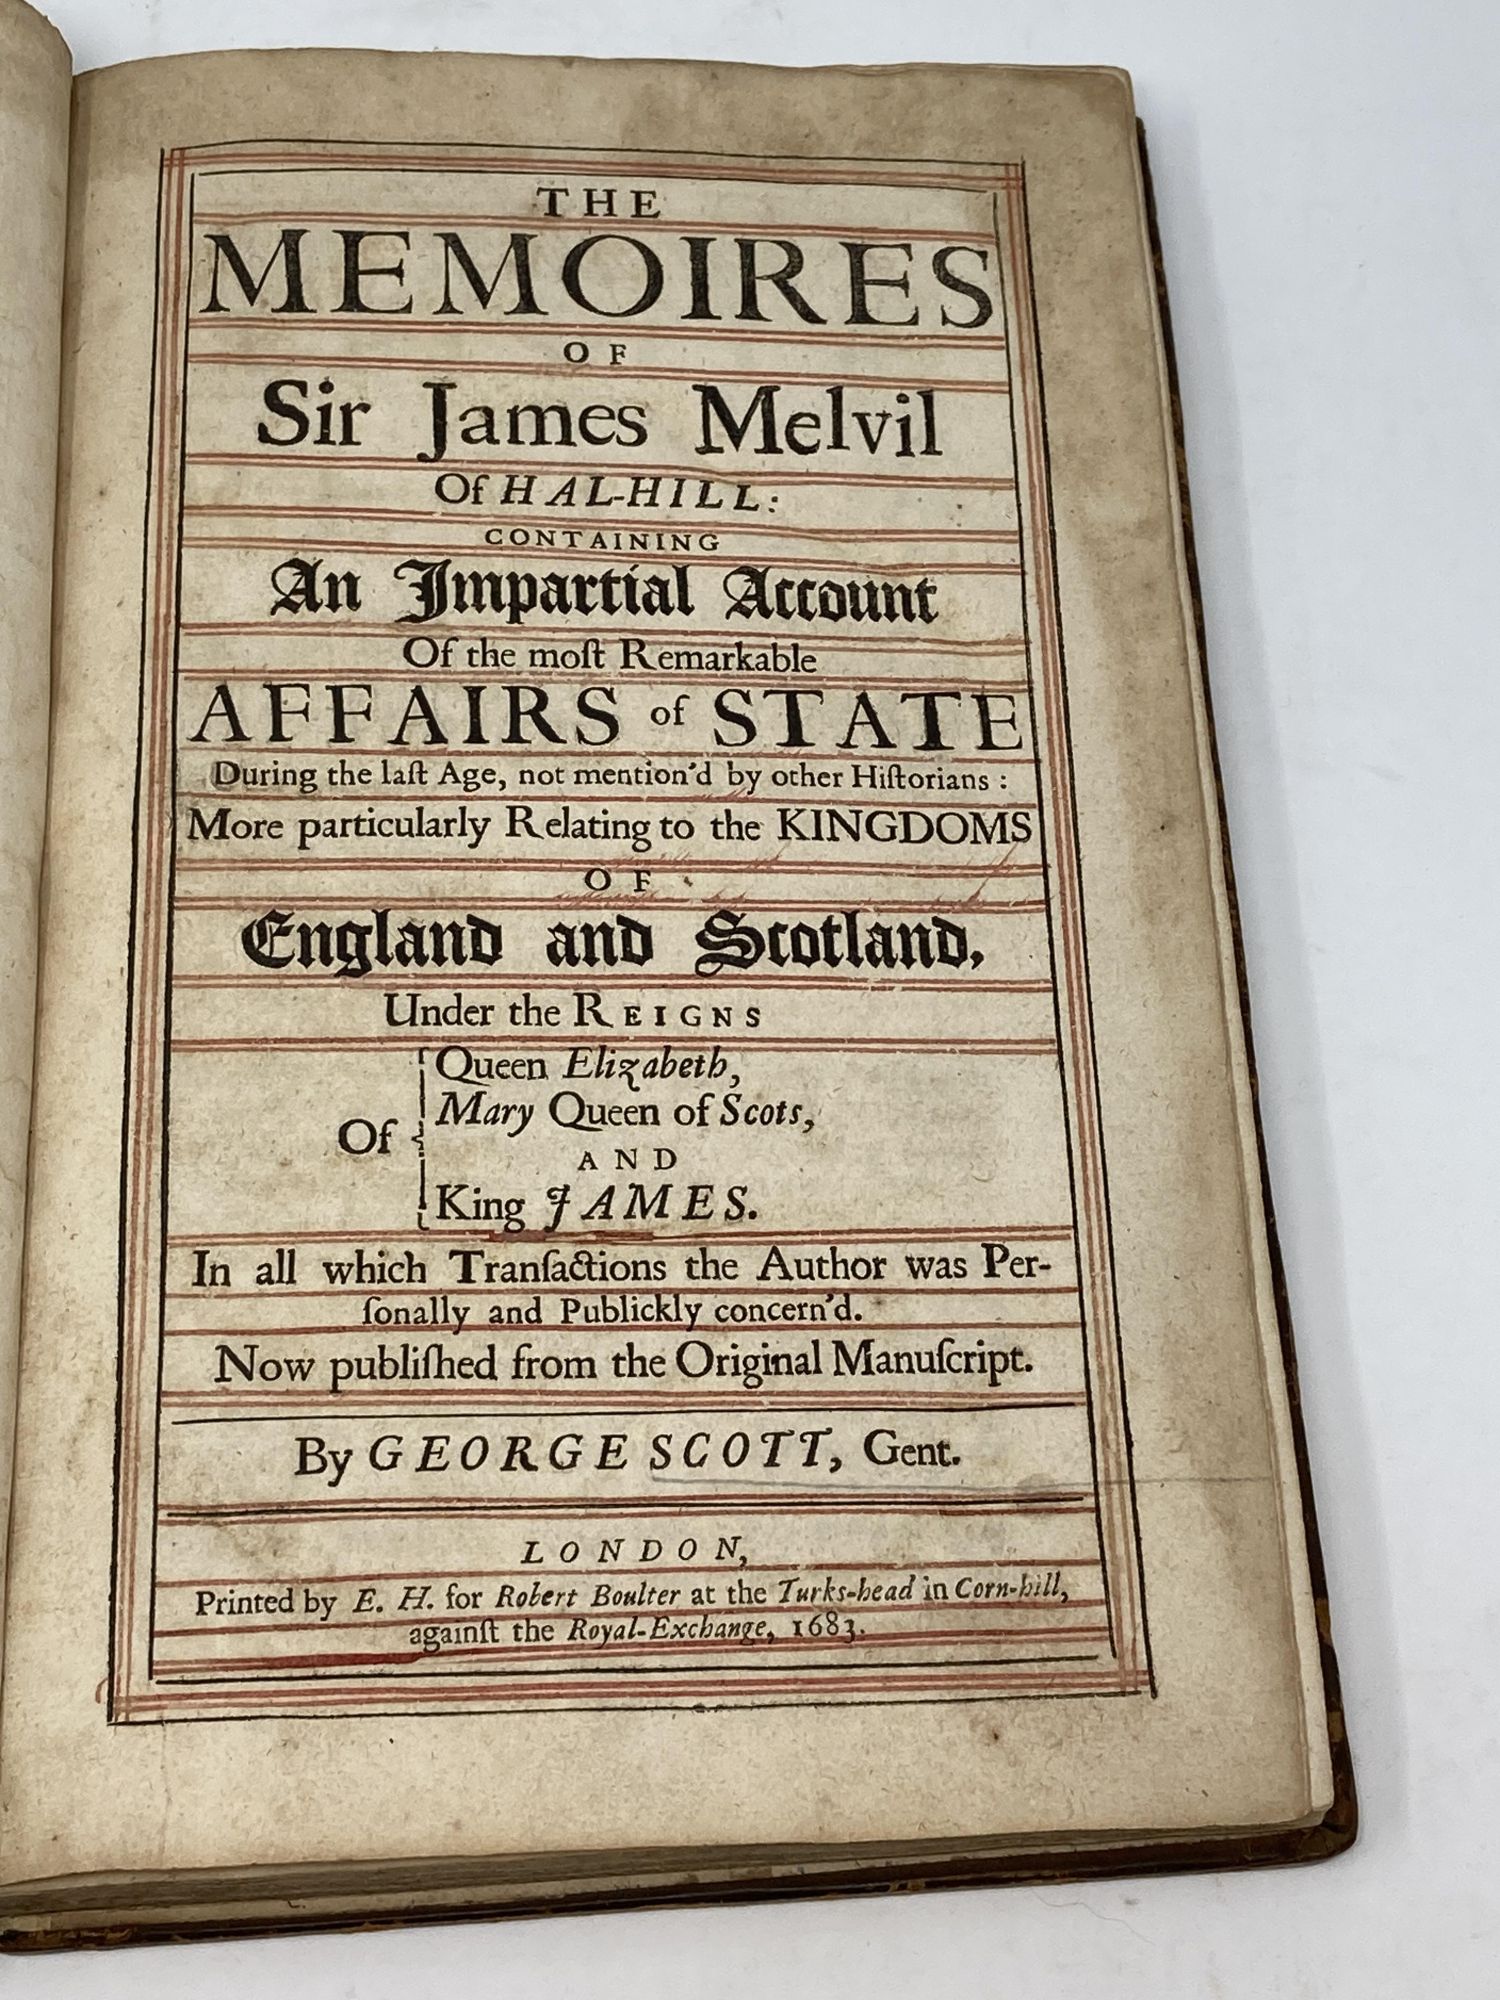 Scott, George - The Memoires of Sir James Melvil of Hal-Hill Containing an Impartial Account of the Most Remarkable Affairs of State During the Last Age, Not Mention'd by Other Historians: More Particularly Relating to the Kingdoms of England and Scotland, Under the Reigns of Queen Elizabeth, Mary Queen of Scots, and King James. In All Which Transactions the Author Was Personally and Publickly Concern'd